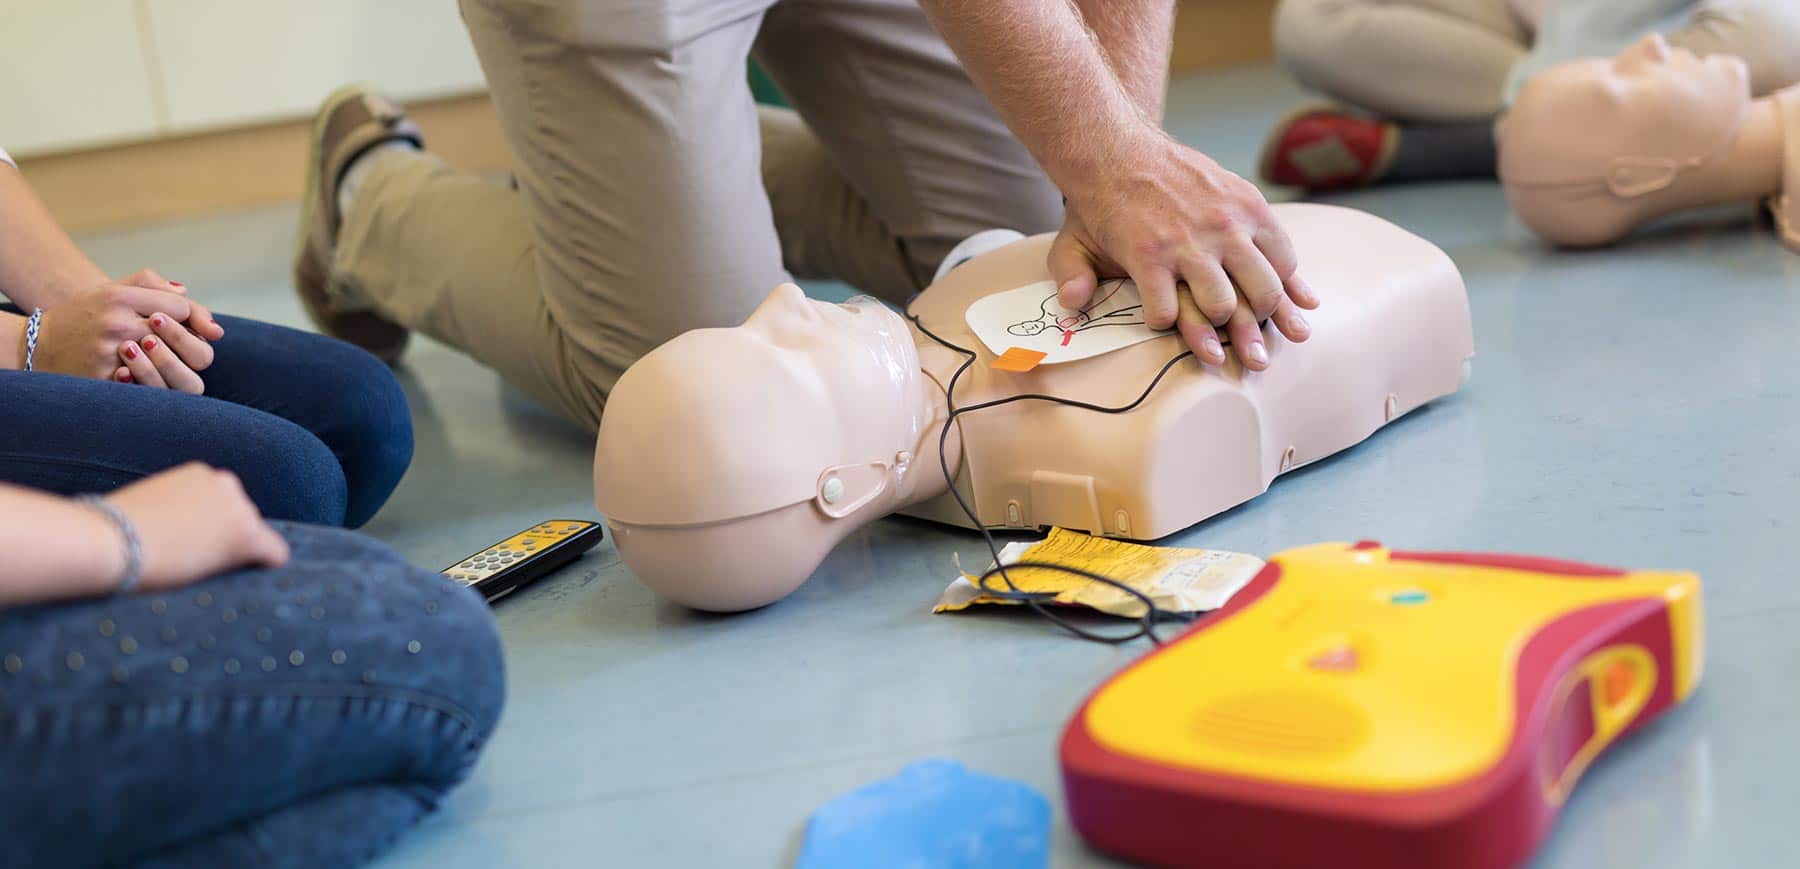 Why Should You Learn CPR?